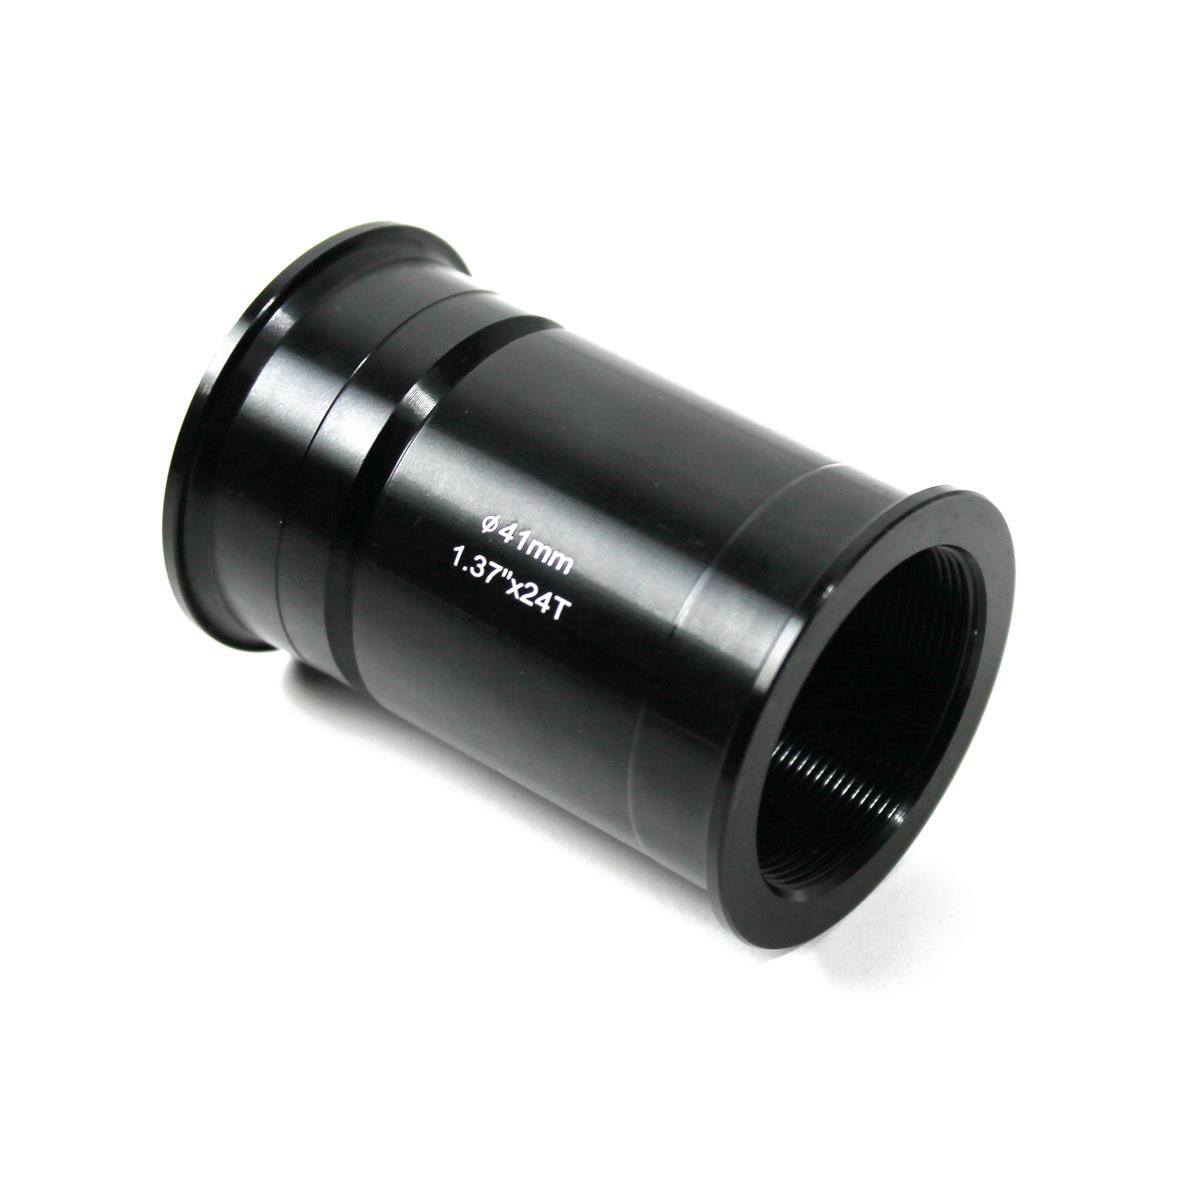 PF30 adapter for pressfit frames with 41mm diameter